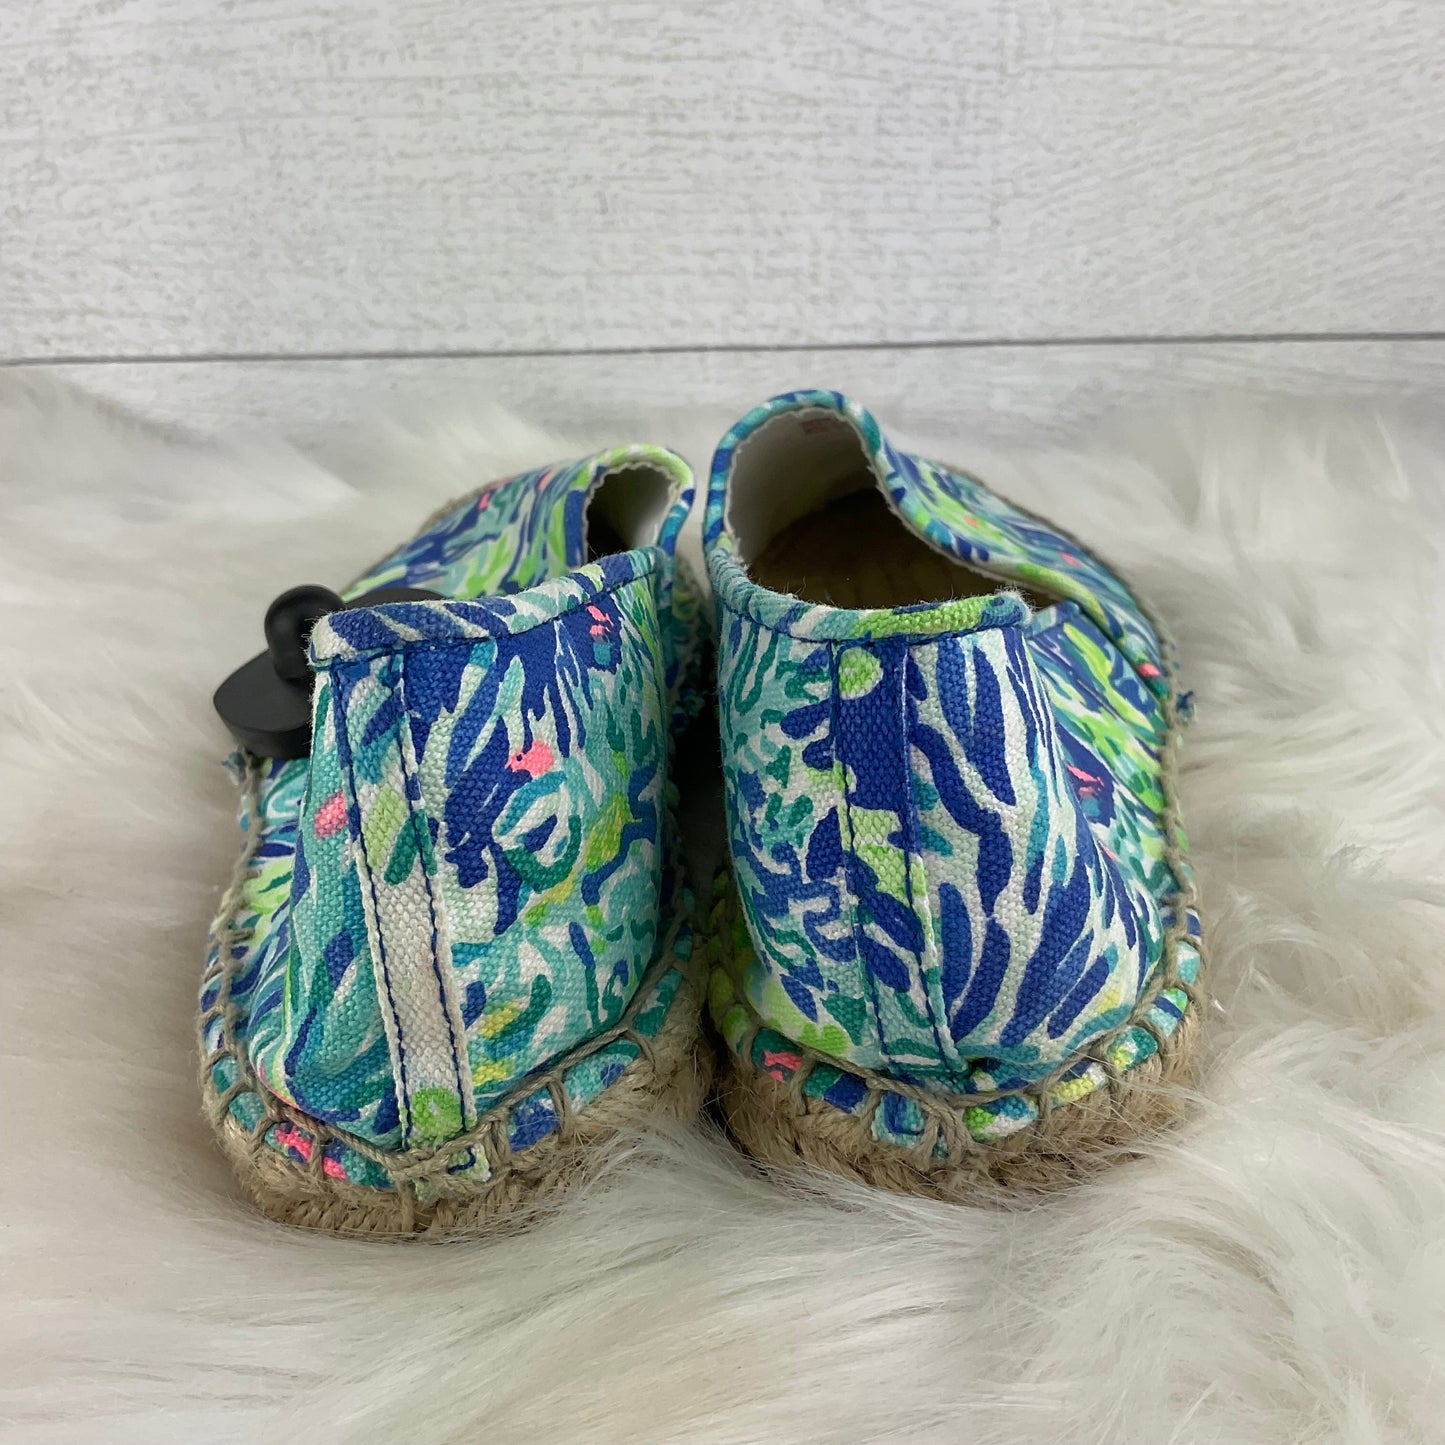 Shoes Designer By Lilly Pulitzer  Size: 7